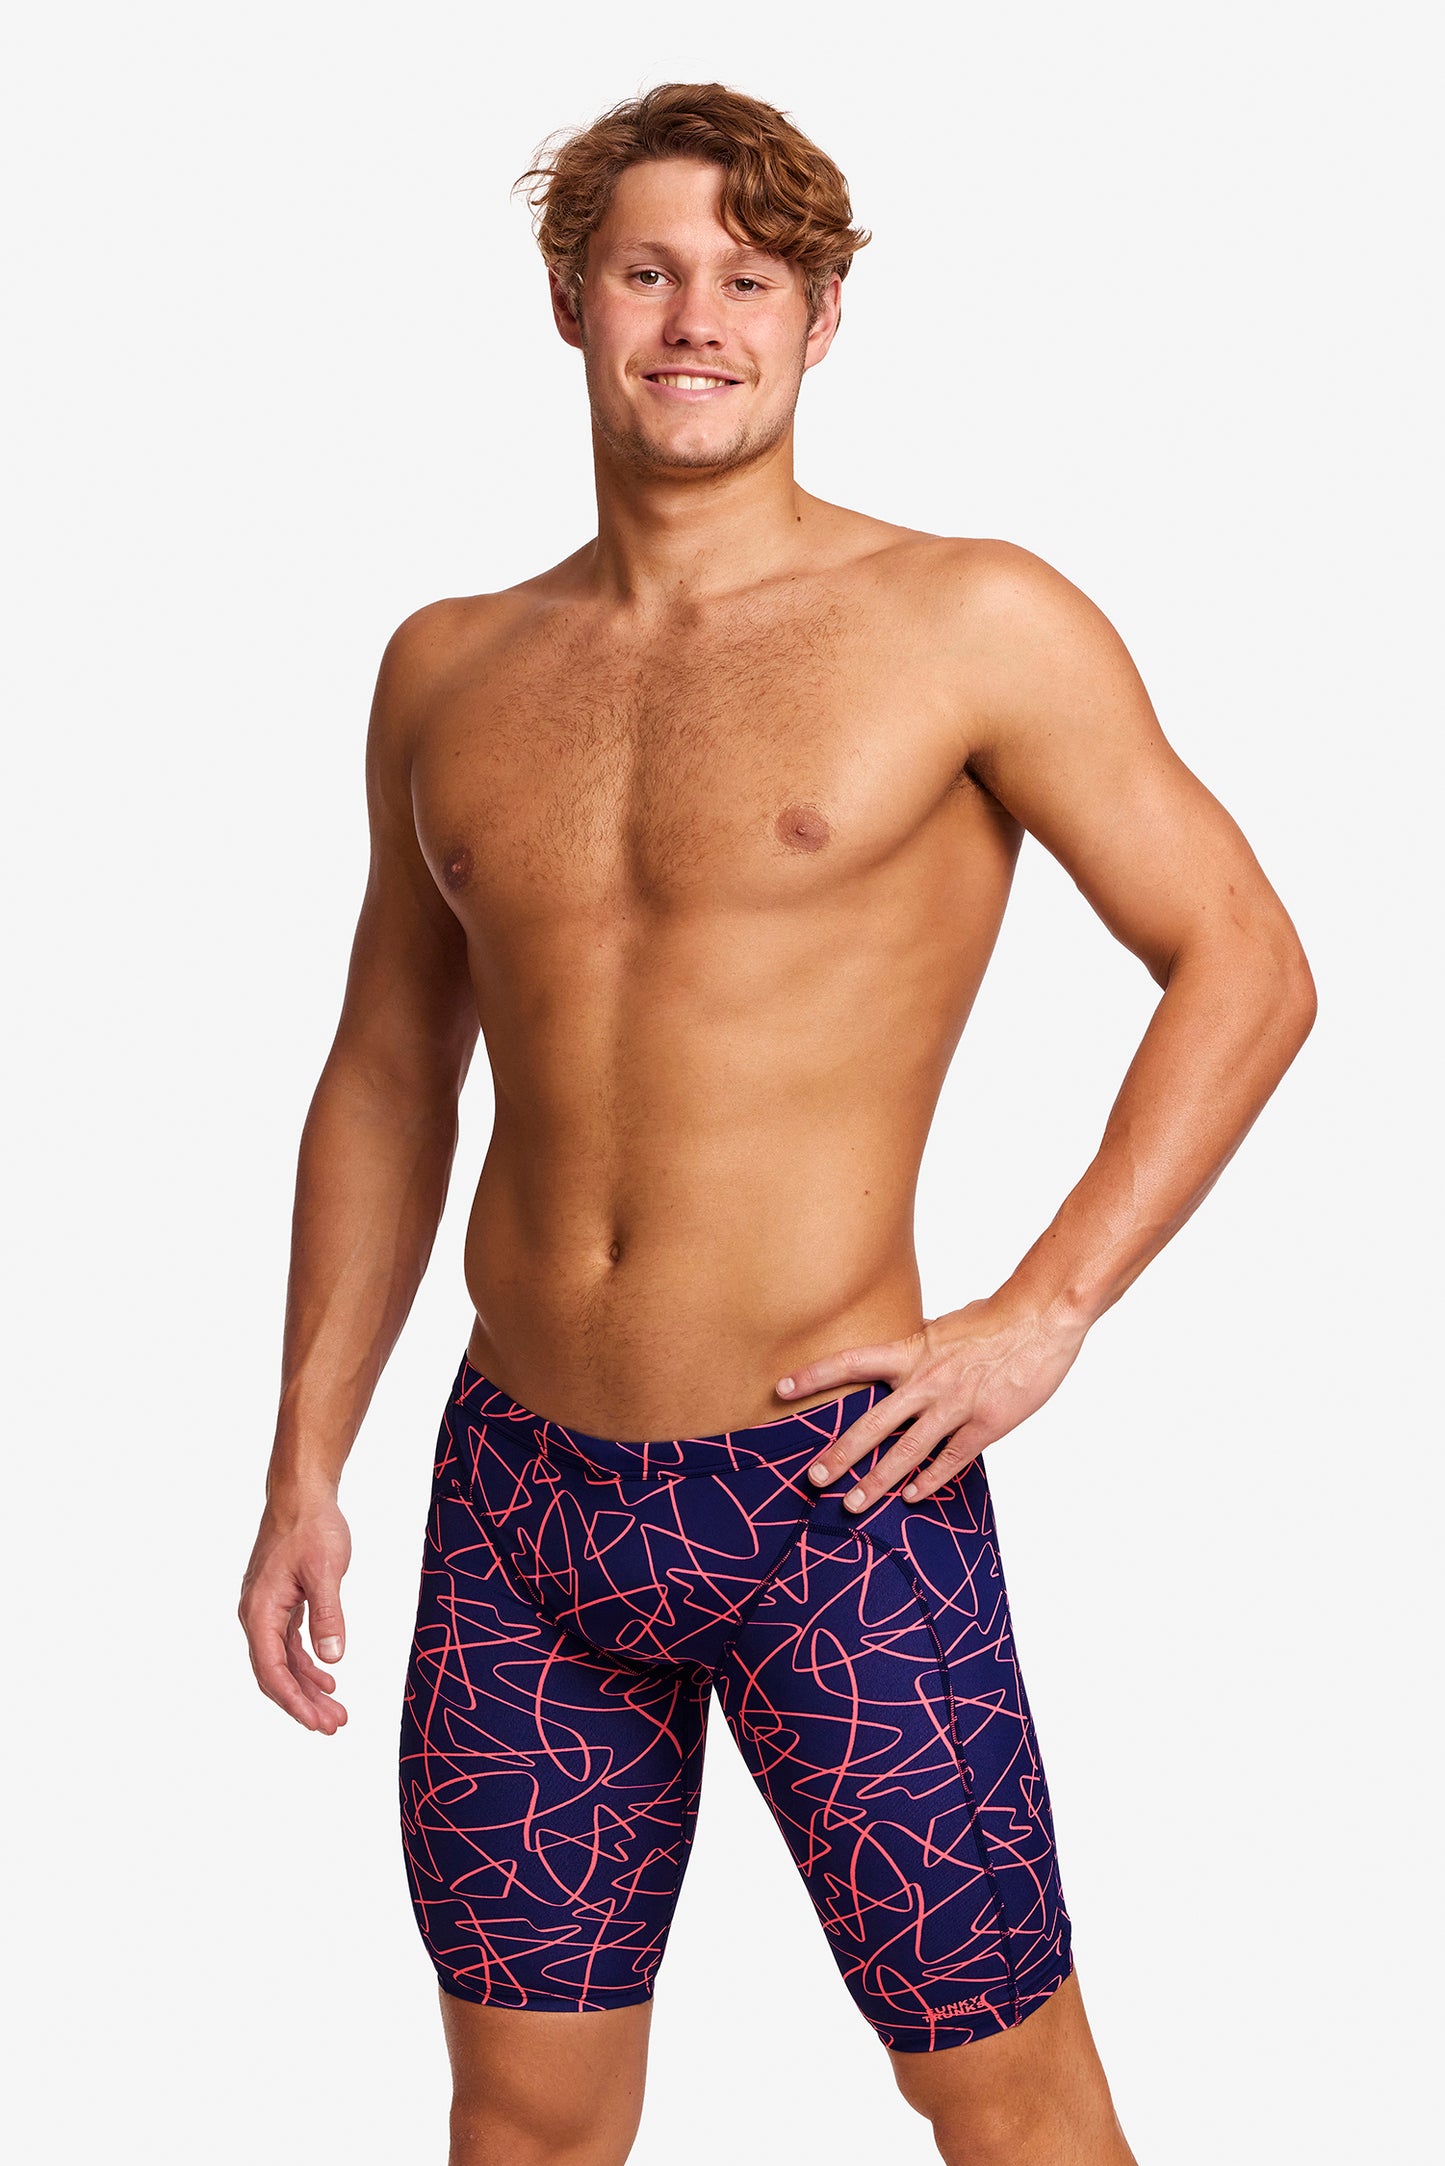 Funky Trunks Mens Training Jammers Serial Texter